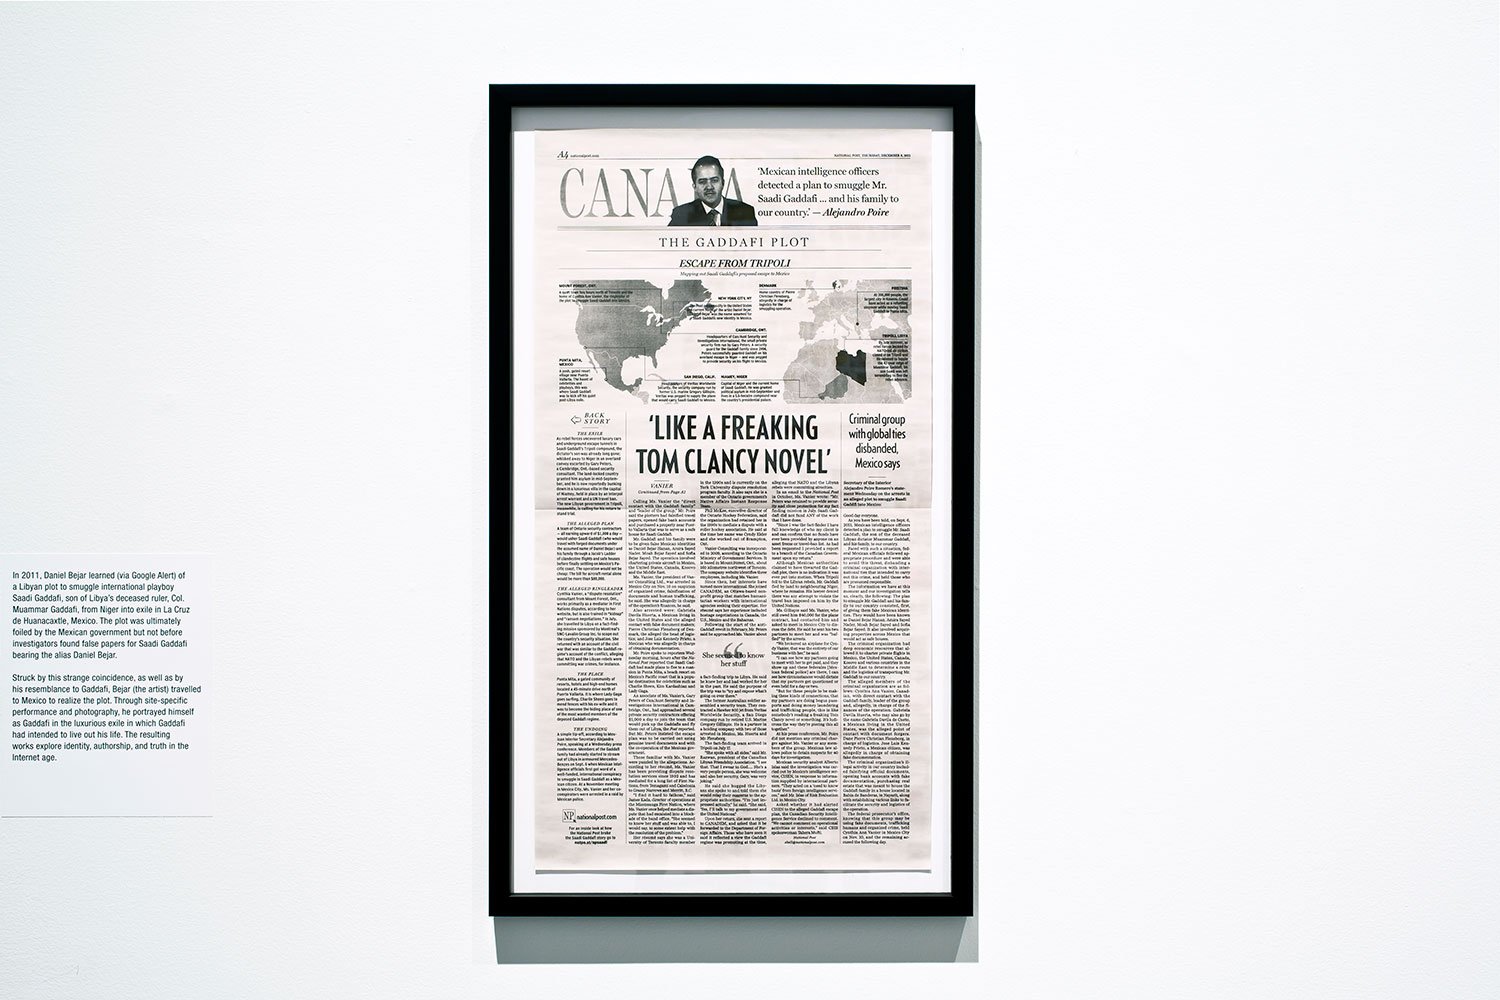   Operation Guest (The Gaddafi Plot) &nbsp;   2014, offset print on newsprint 28 x 15 inches Installation view, Brooklyn Museum, NY 